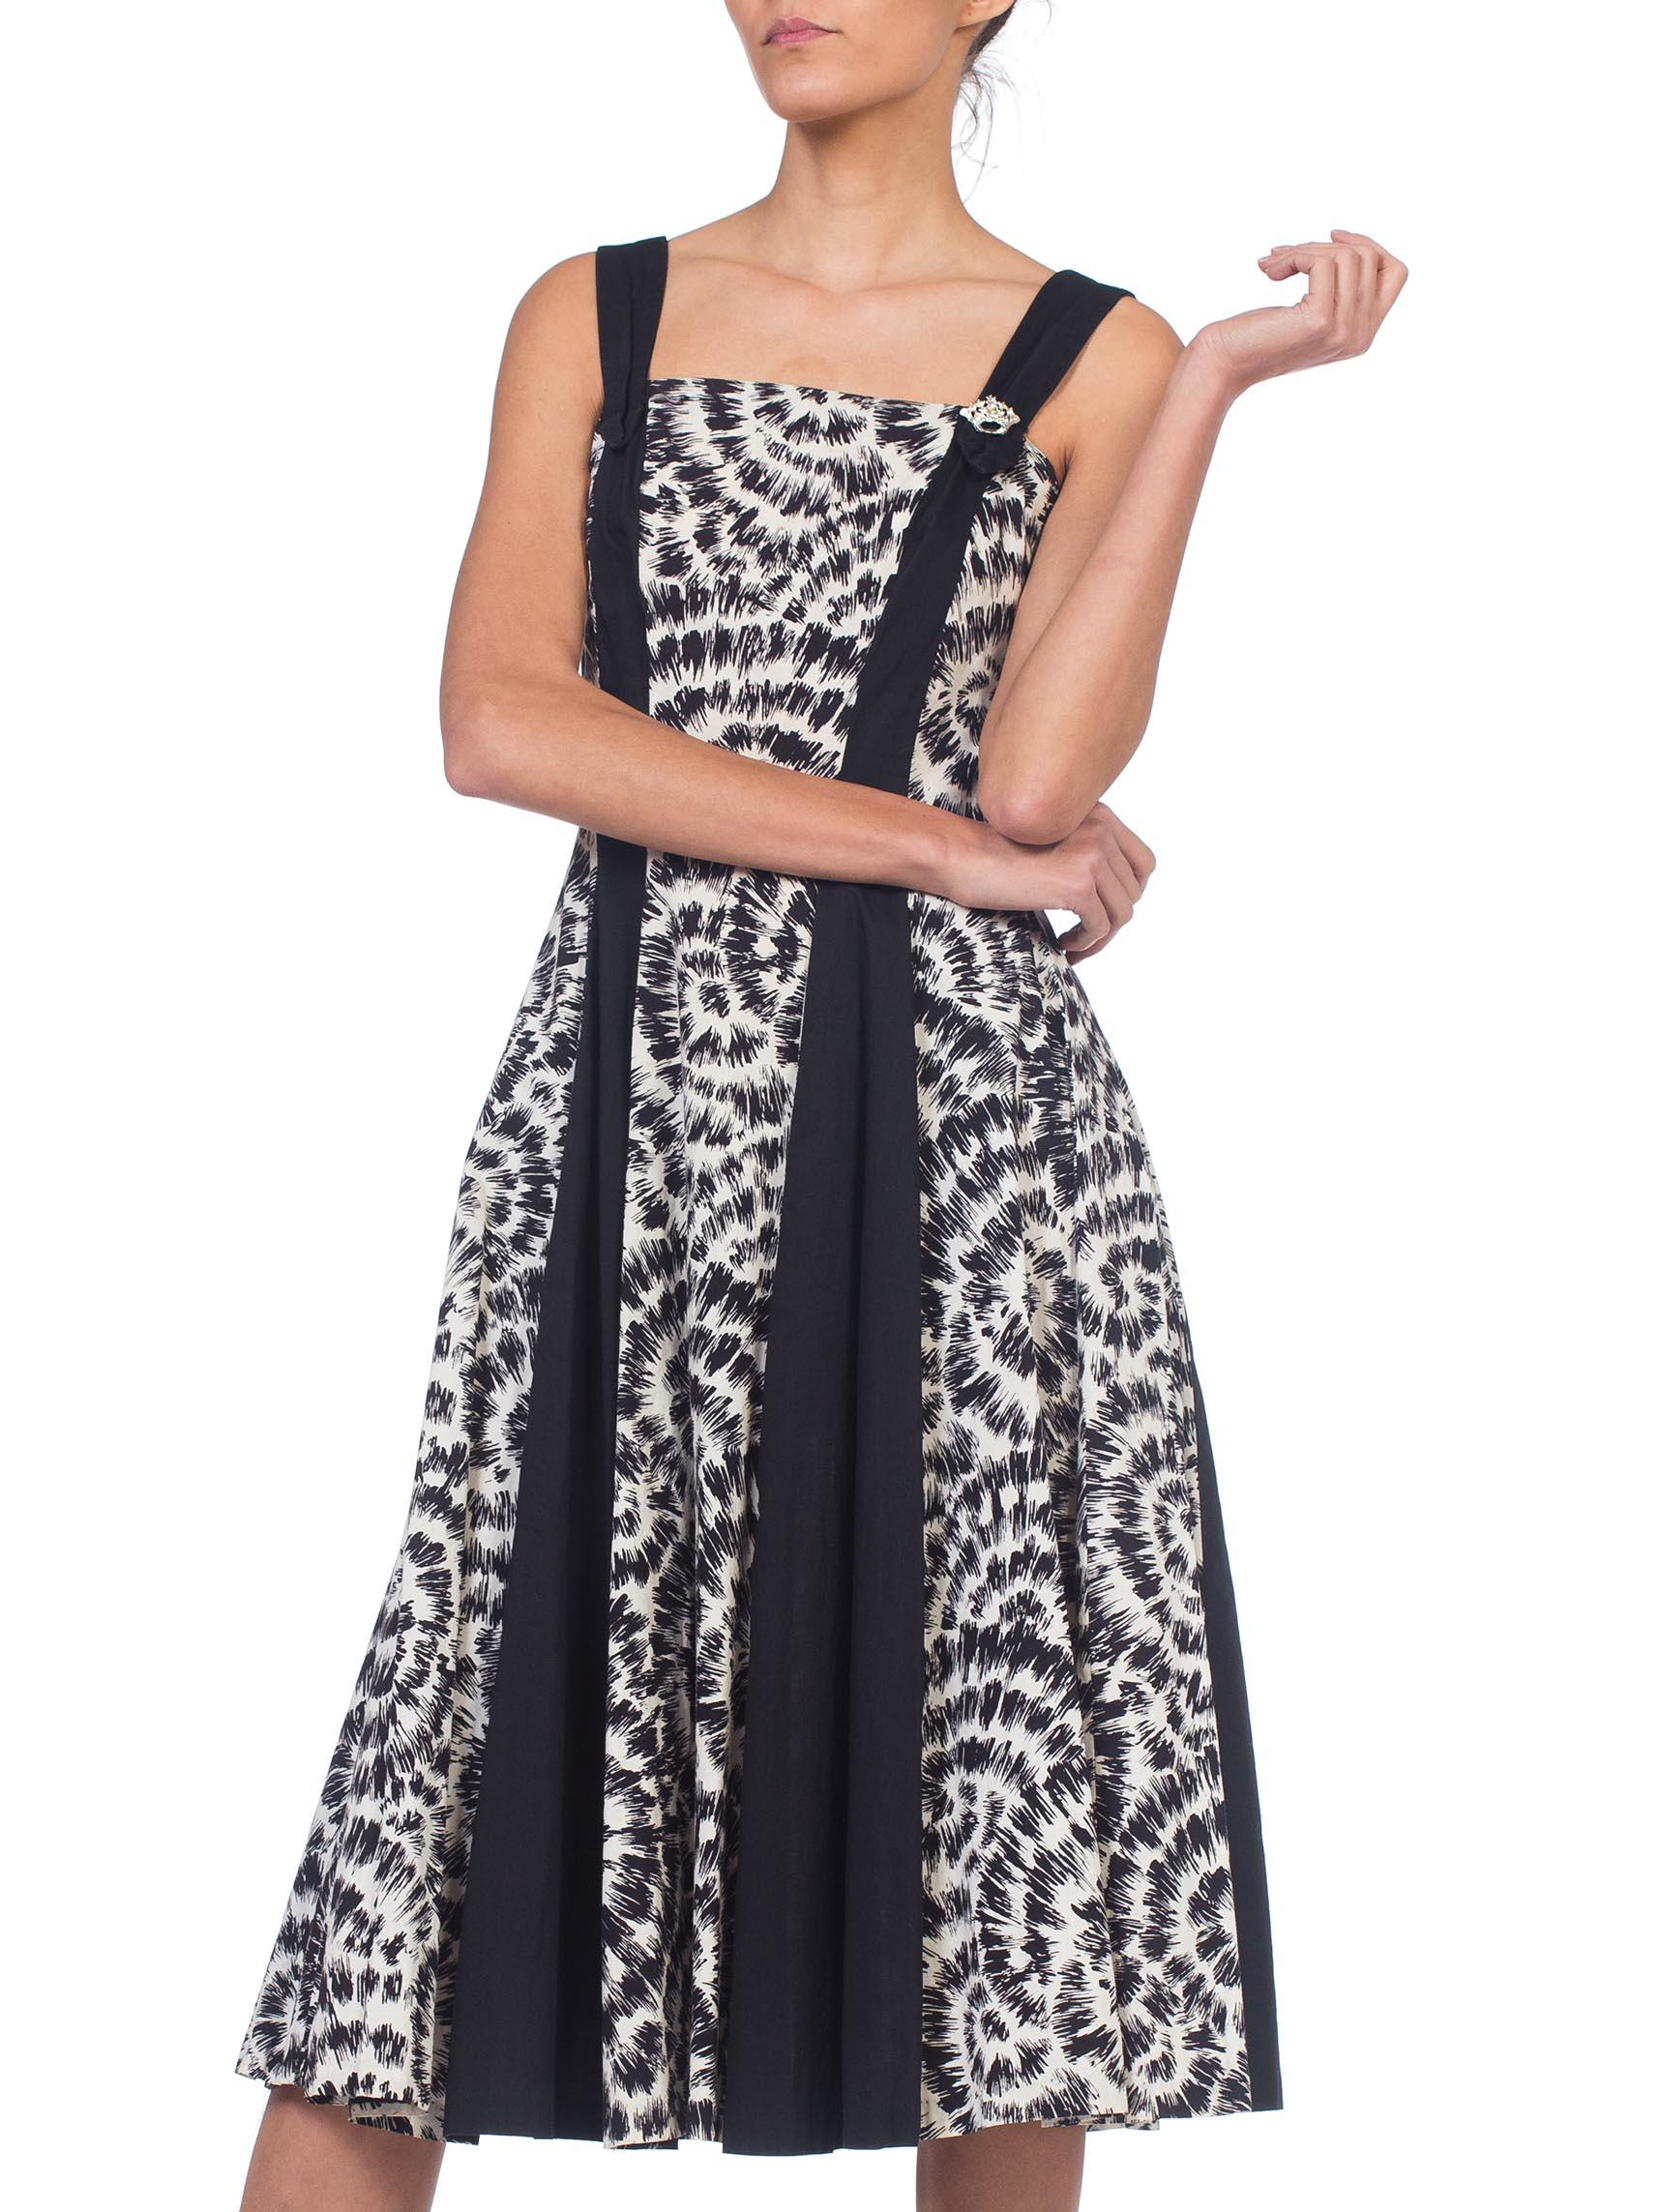 1950S Black & White Printed Cotton Fit Flare Dress 2